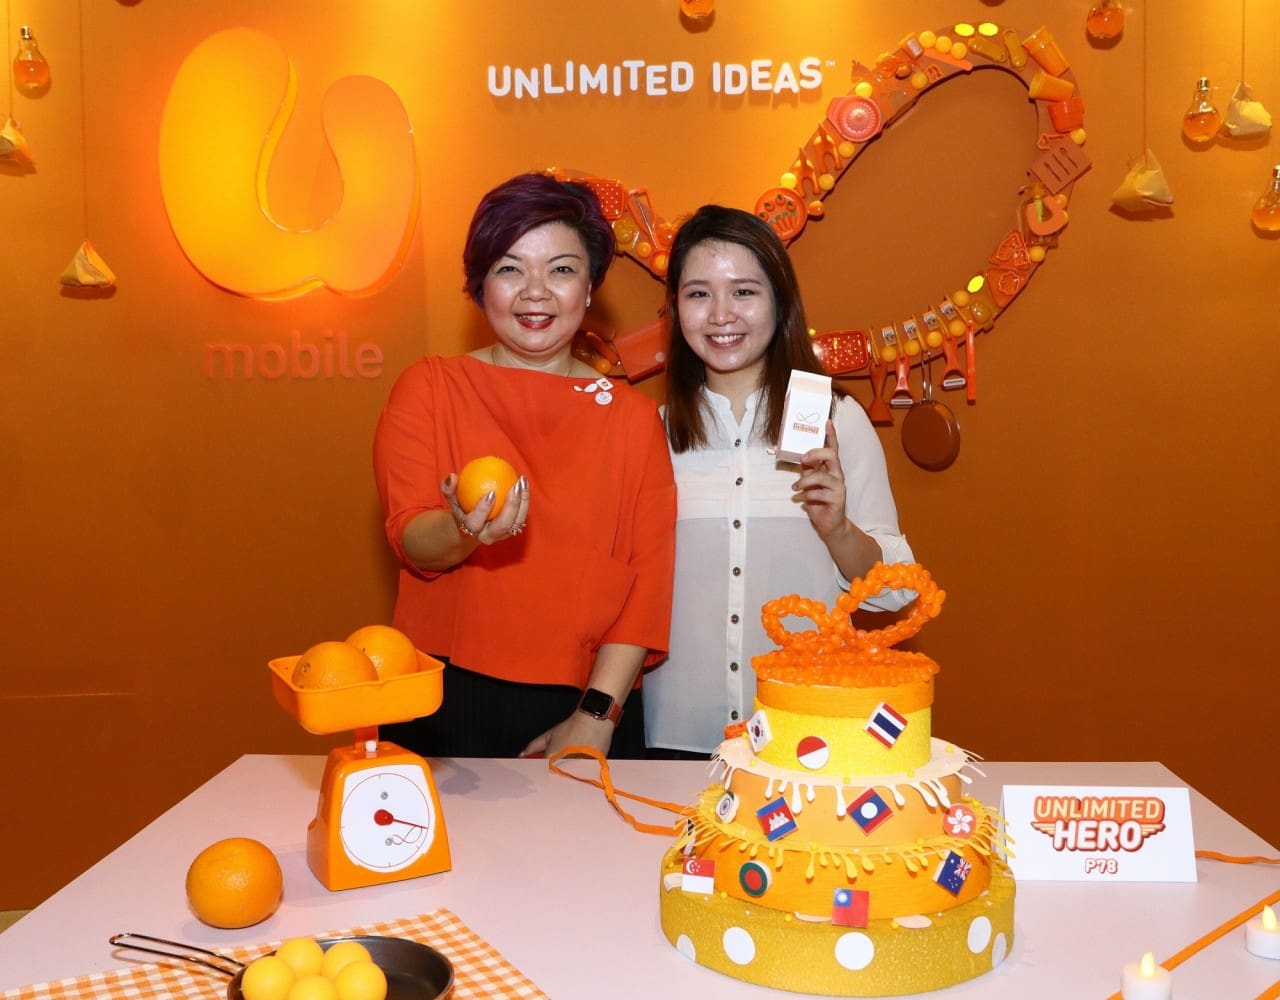 Picture 1 Jasmine Lee and Eunice Martin at Unlimited Hero P78 Launch and Unlimited Ideas Creative Showcase Final